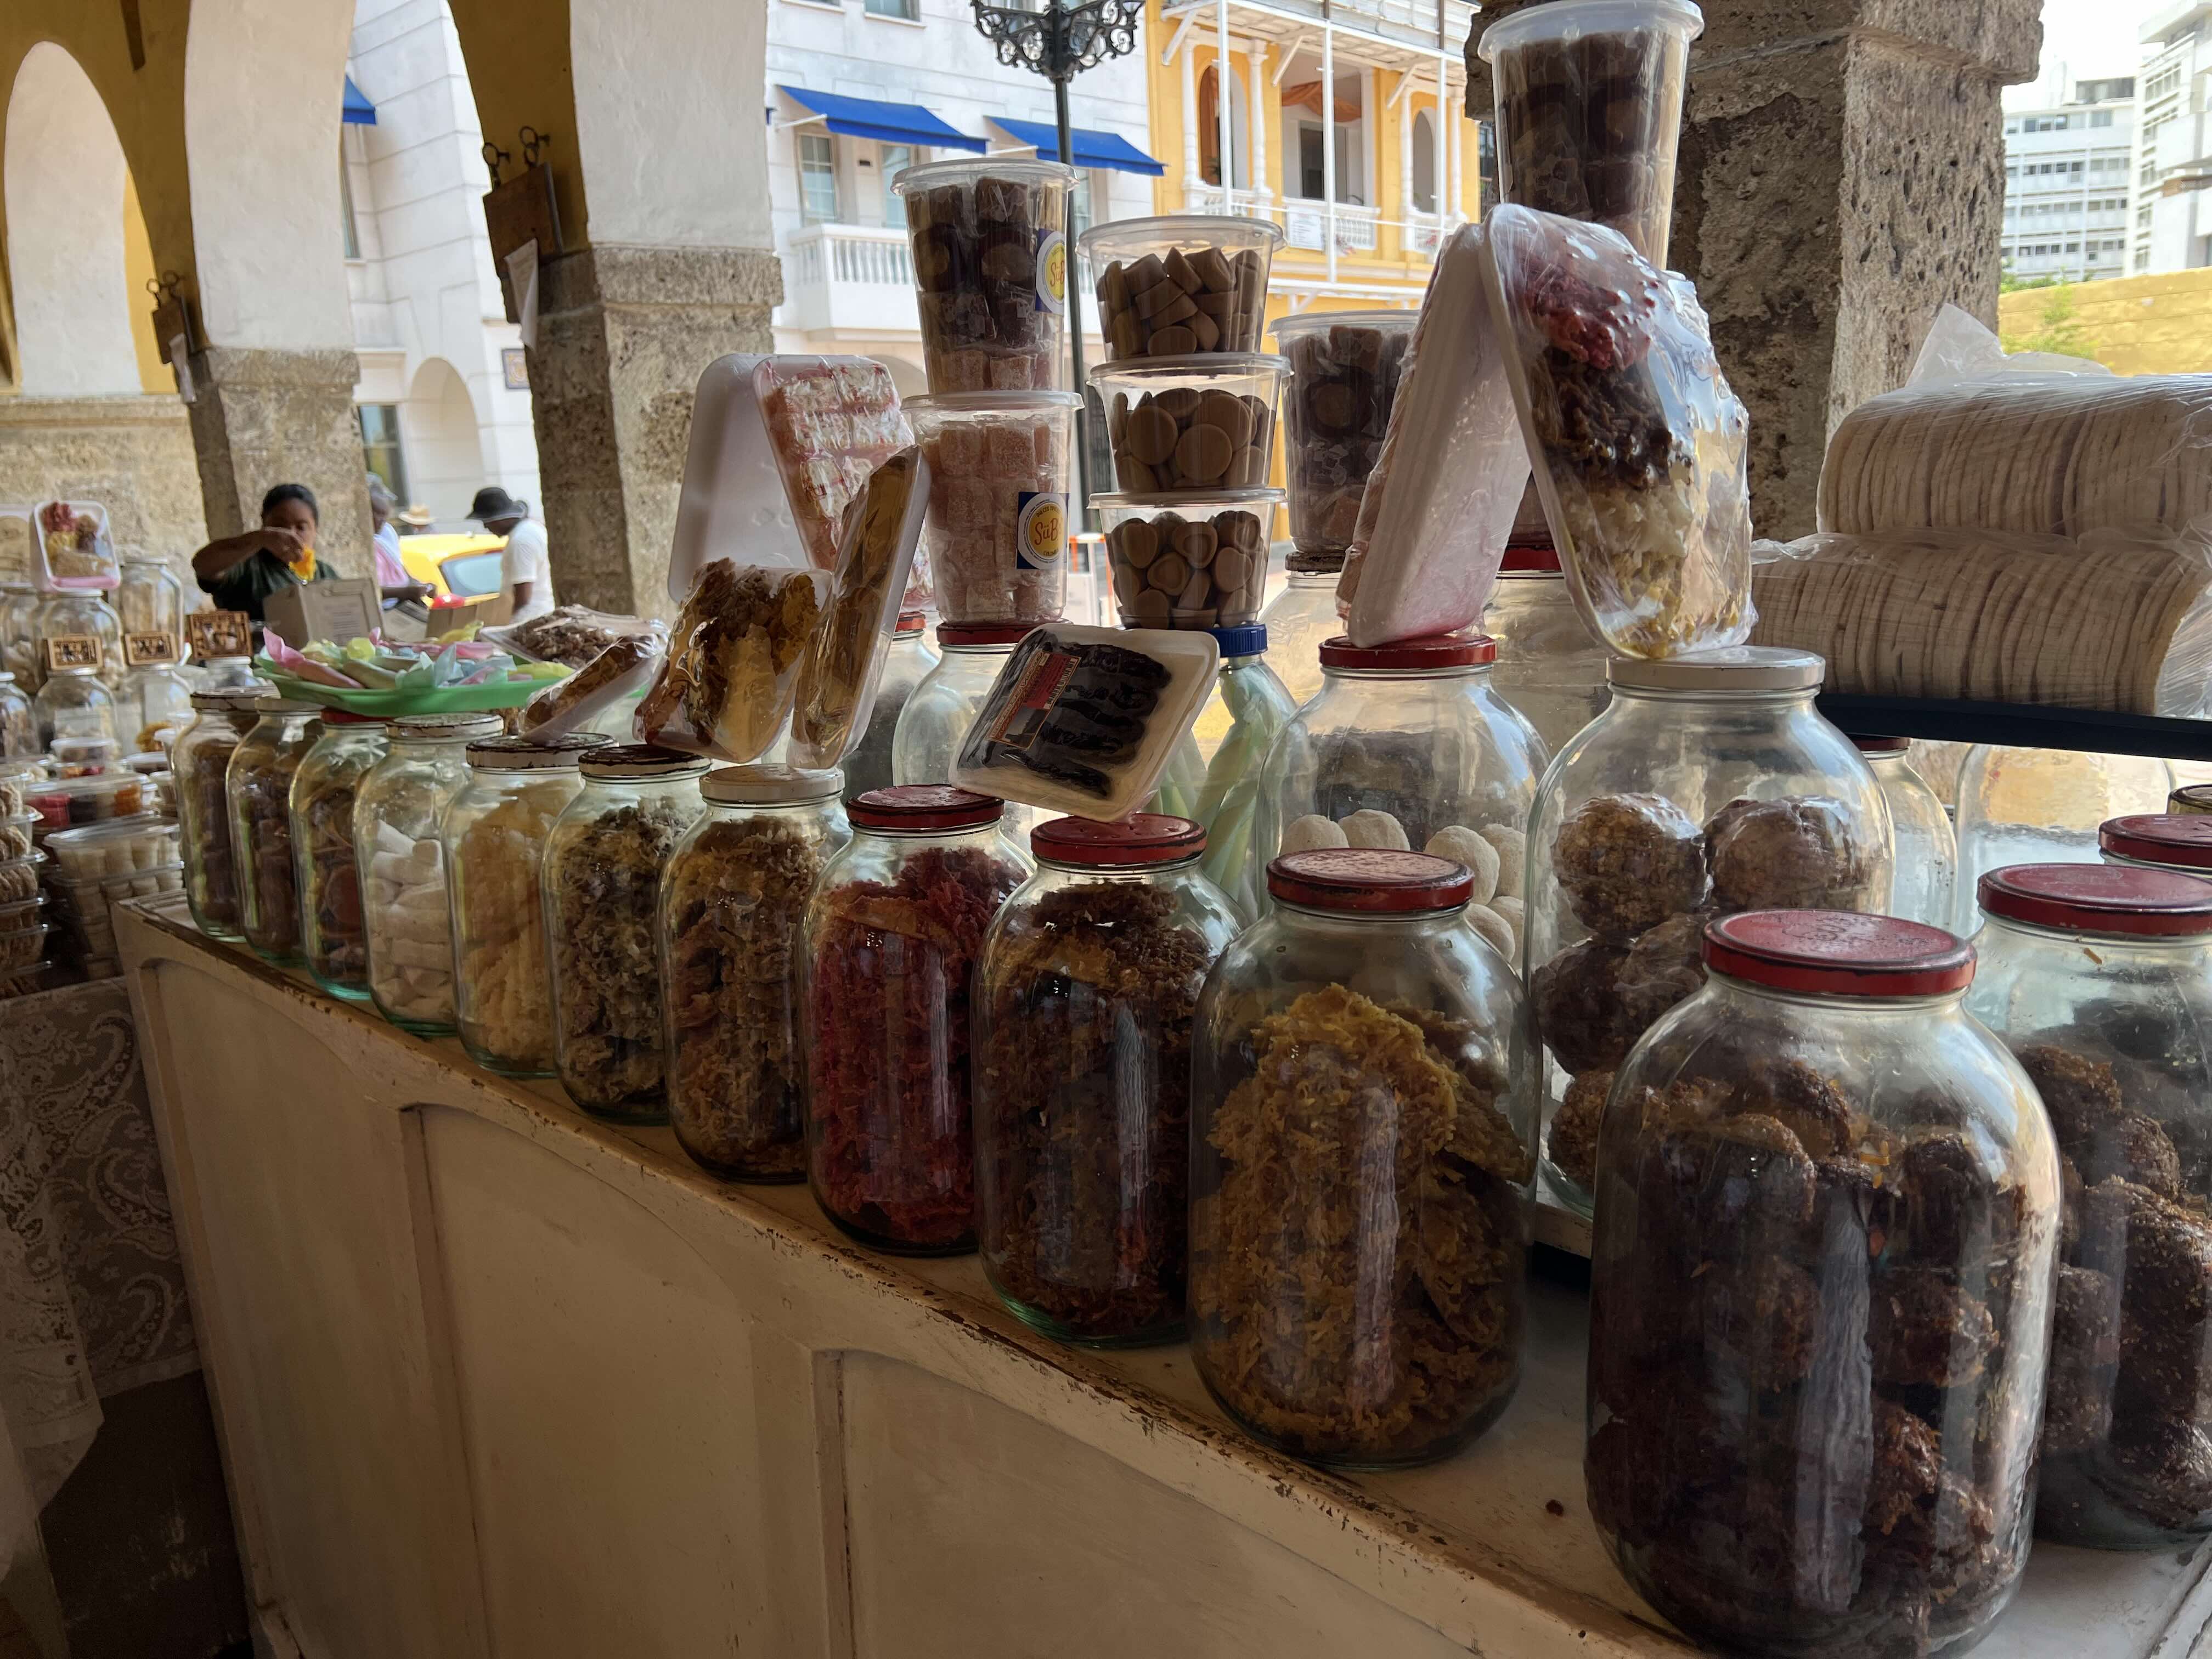 A street stall in Portal de Los Dulces displaying a variety of traditional sweets in clear glass jars.